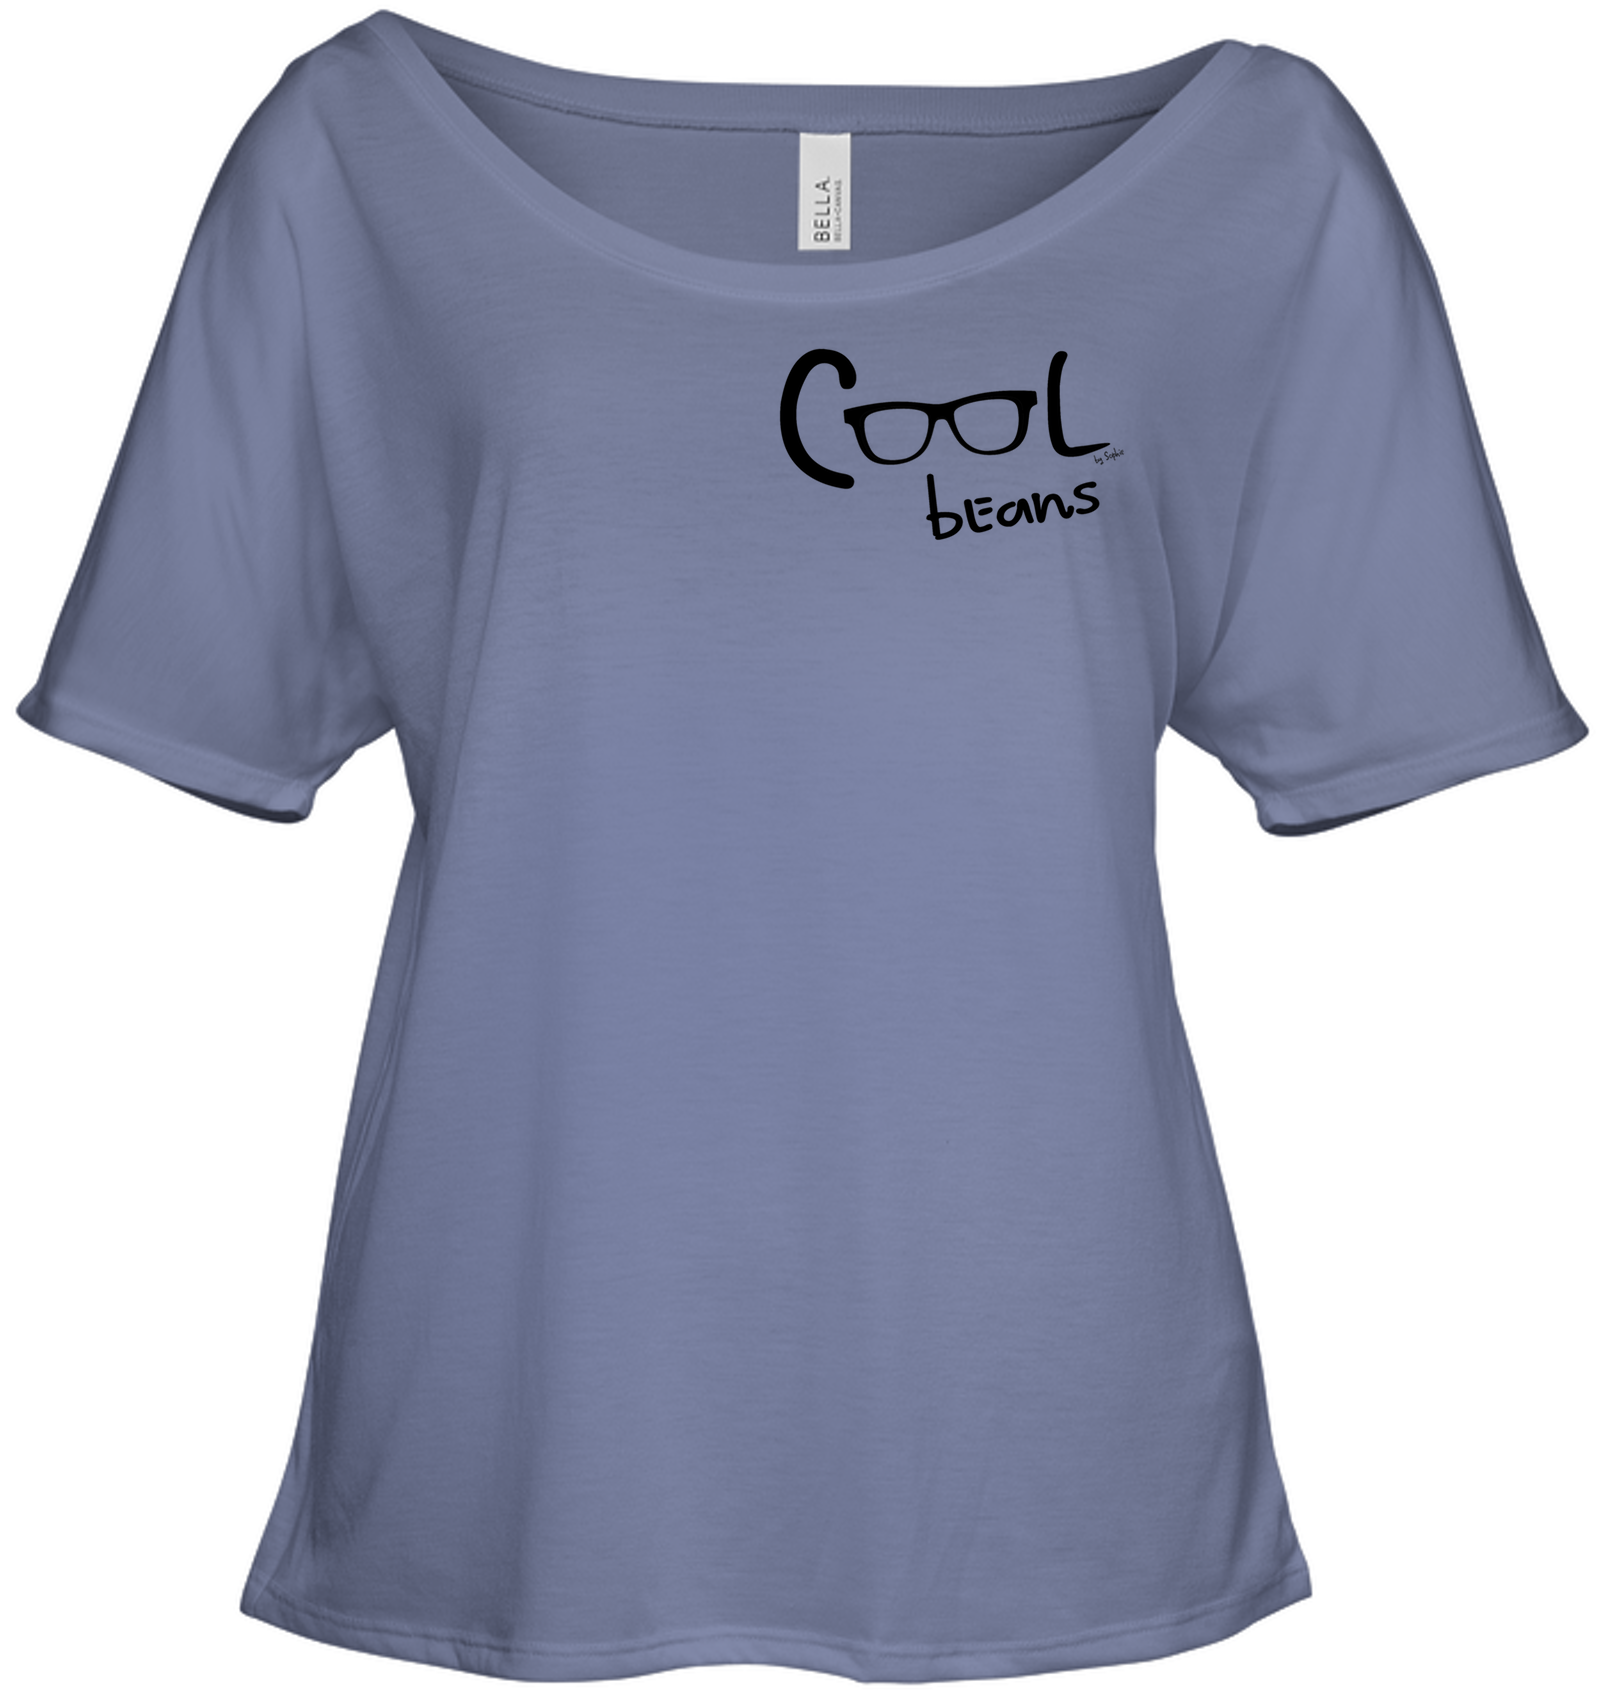 Cool Beans - Black (Pocket Size) - Bella + Canvas Women's Slouchy Tee